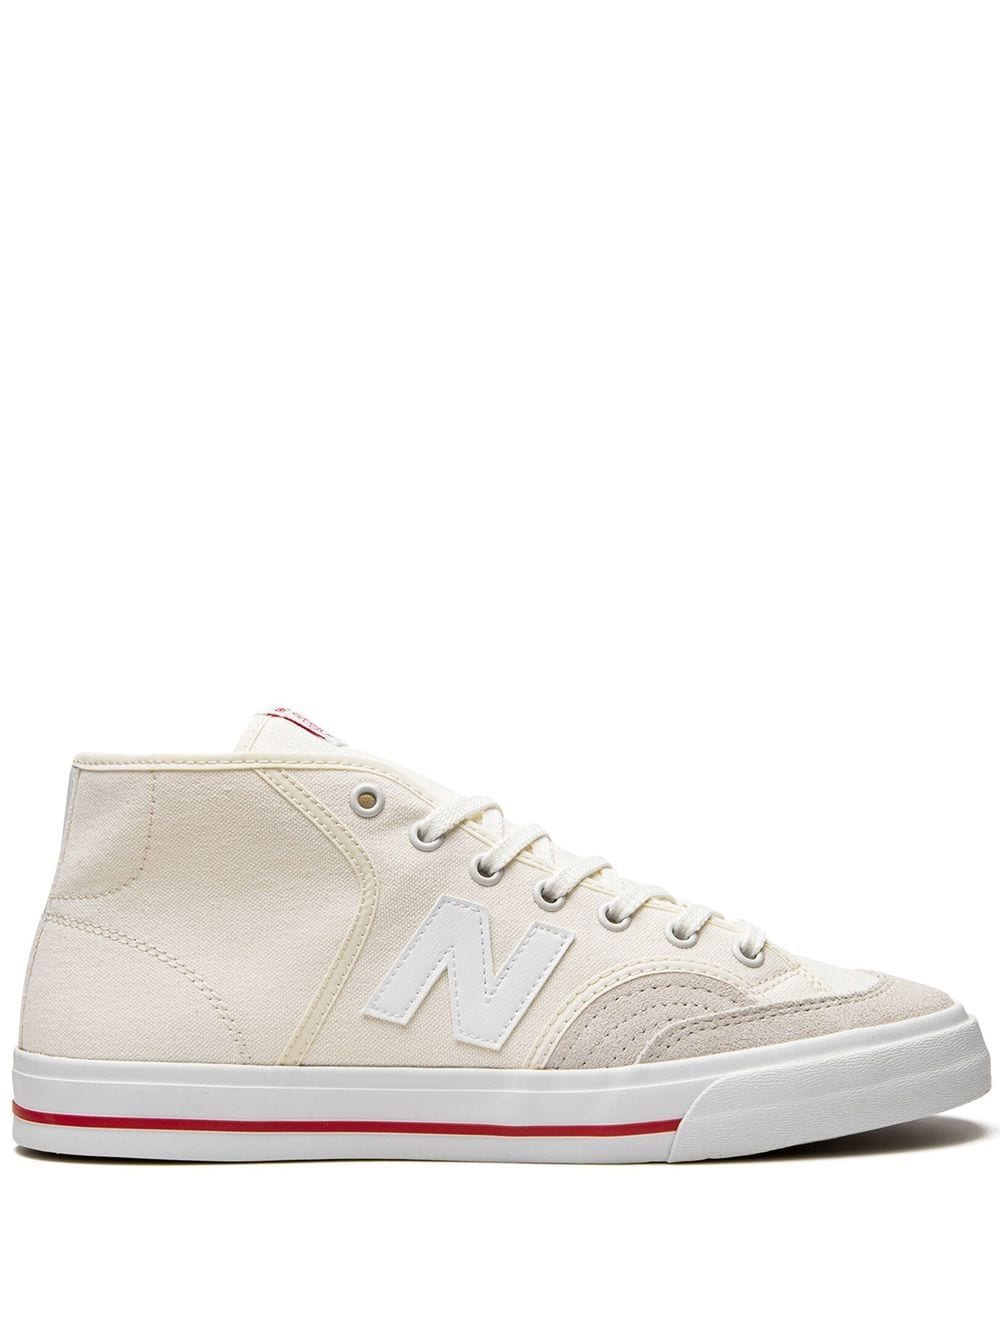 Image 1 of New Balance Numeric 213 Pro Court sneakers